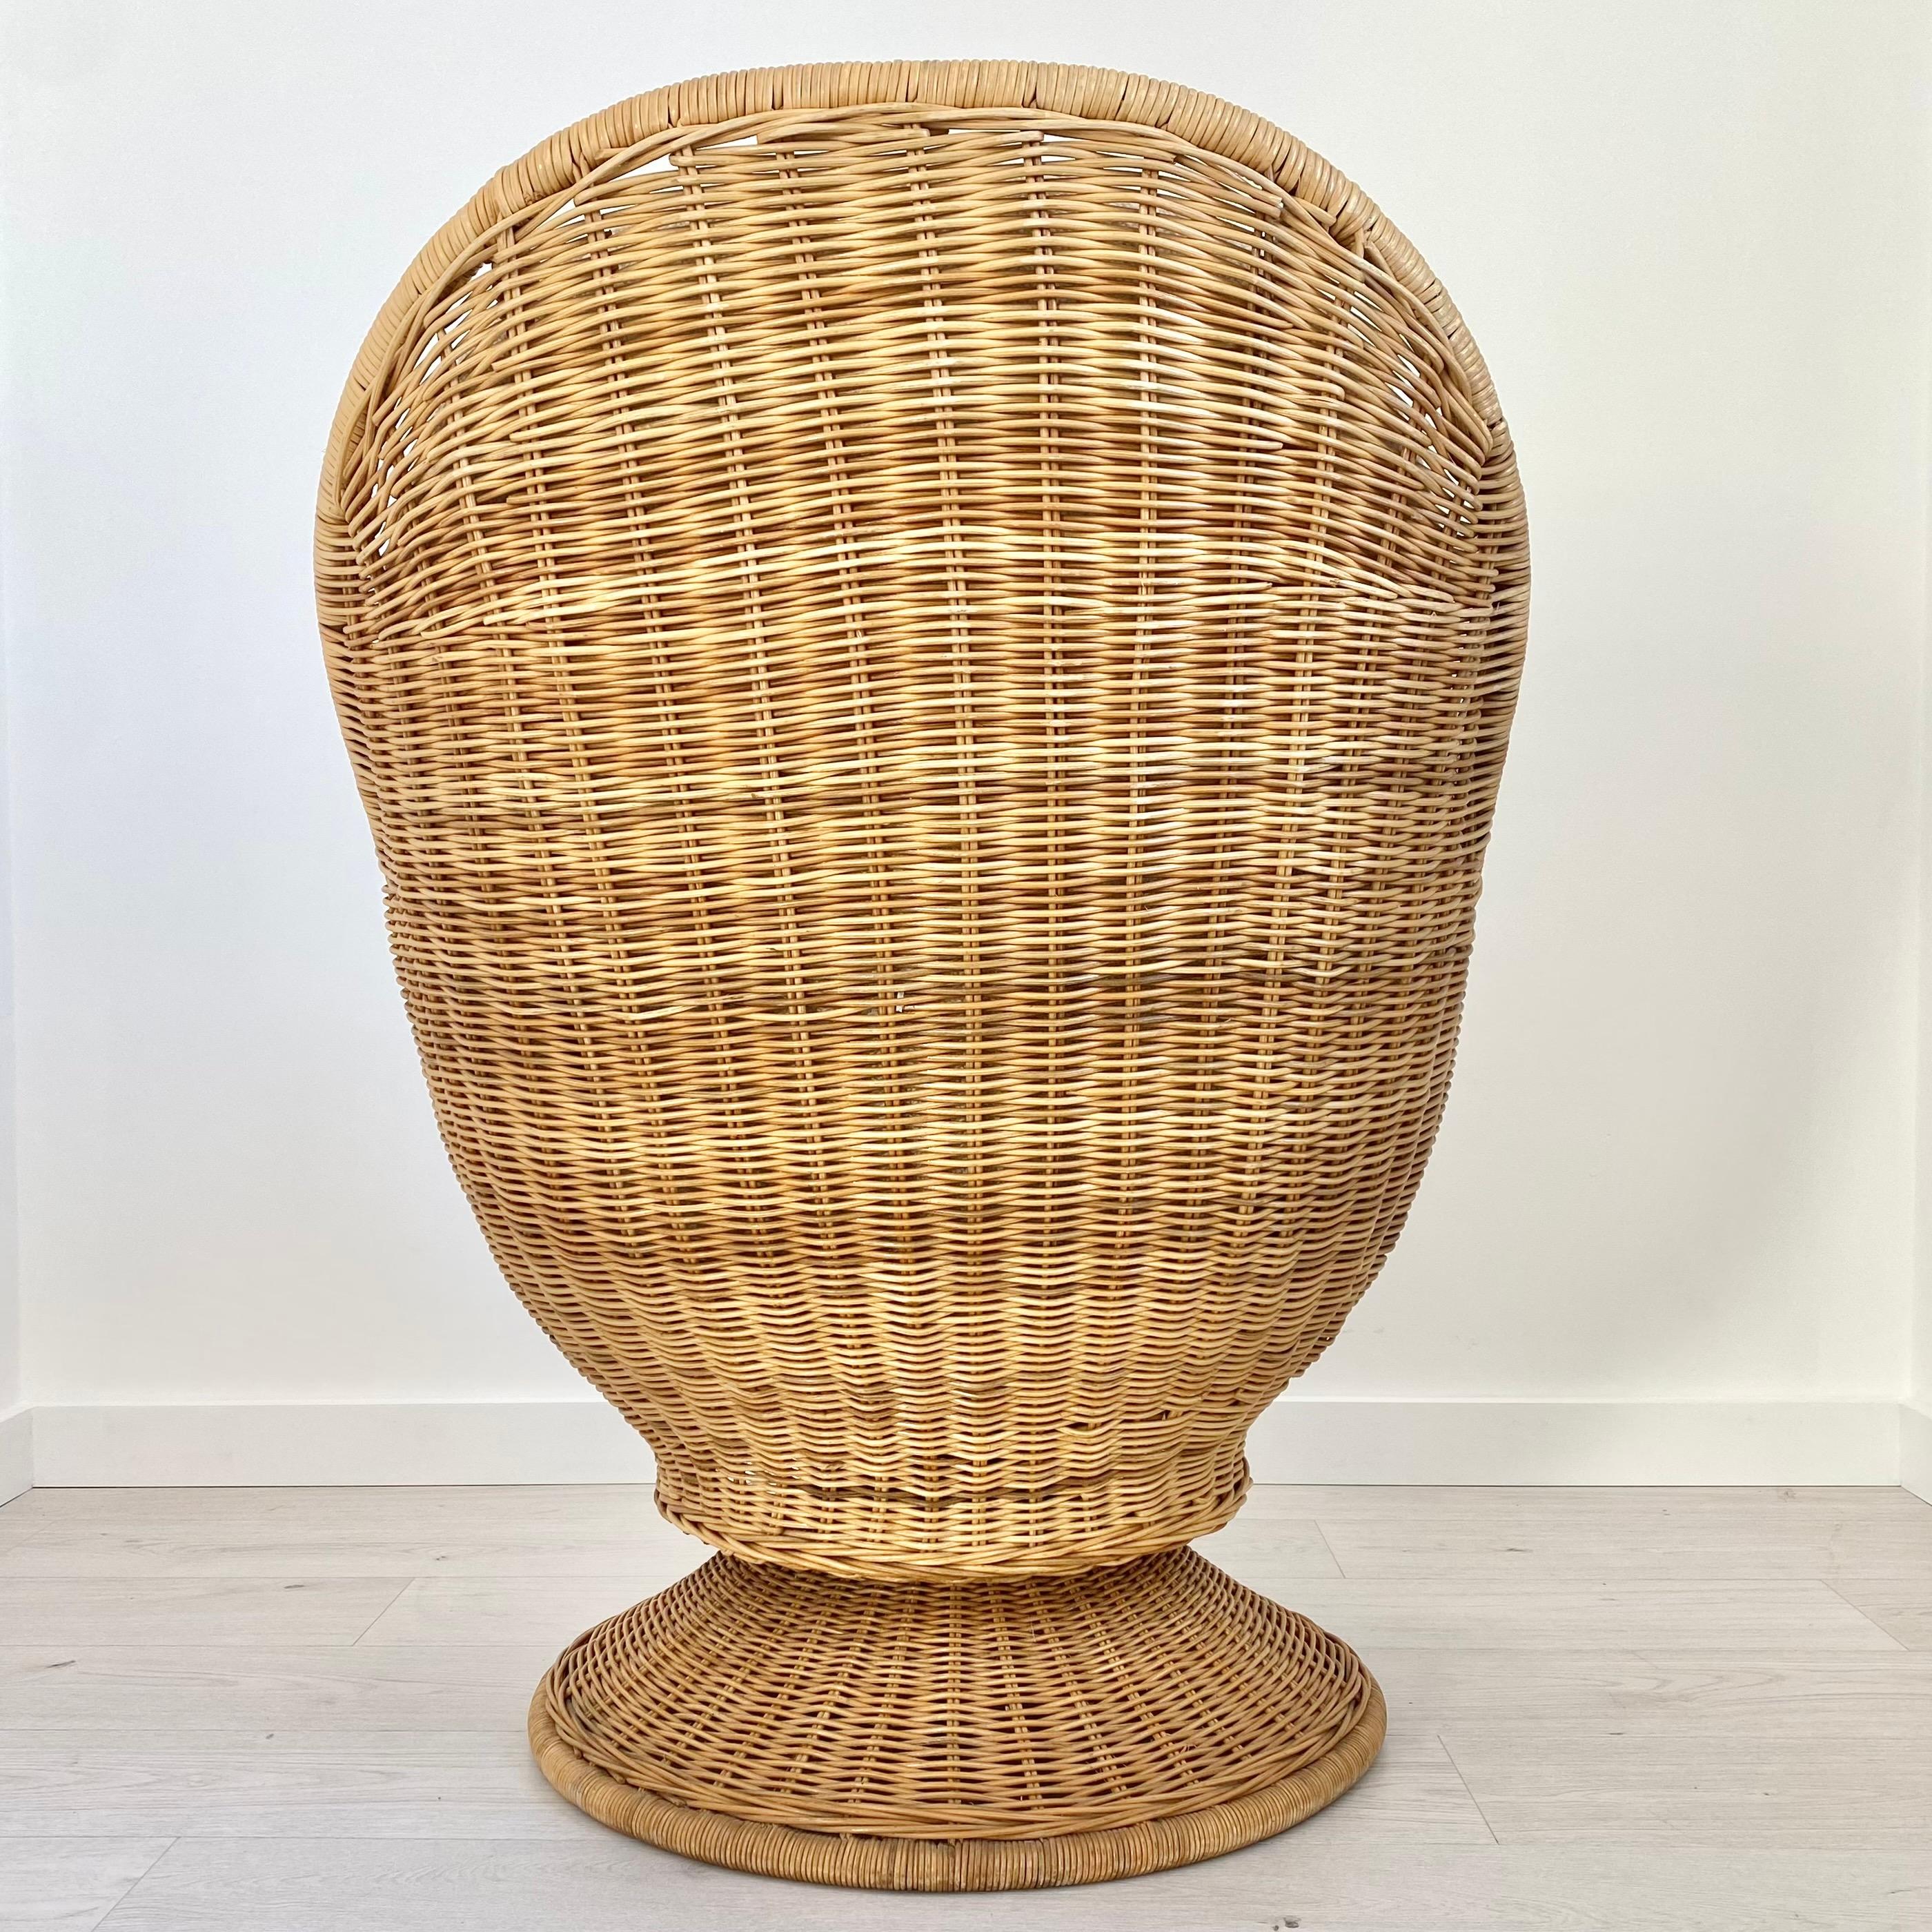 Late 20th Century Wicker Swivel Chair in Wool Boucle, 1970s USA For Sale